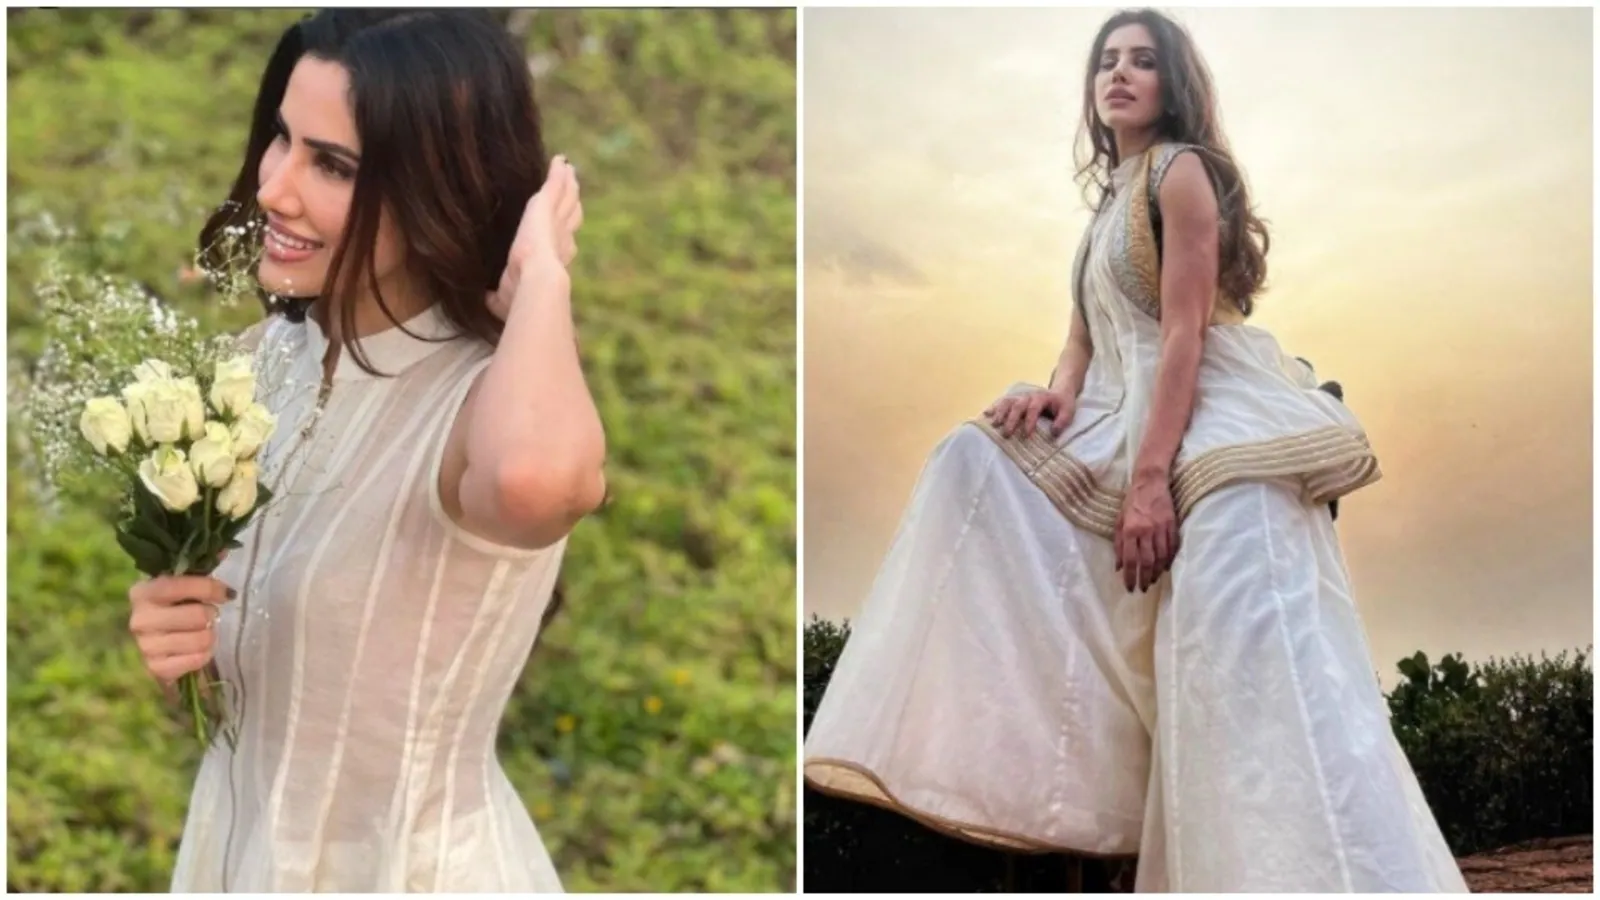 Sonnalli Seygall’s pics from her golden hour photoshoot are what dreams are made of